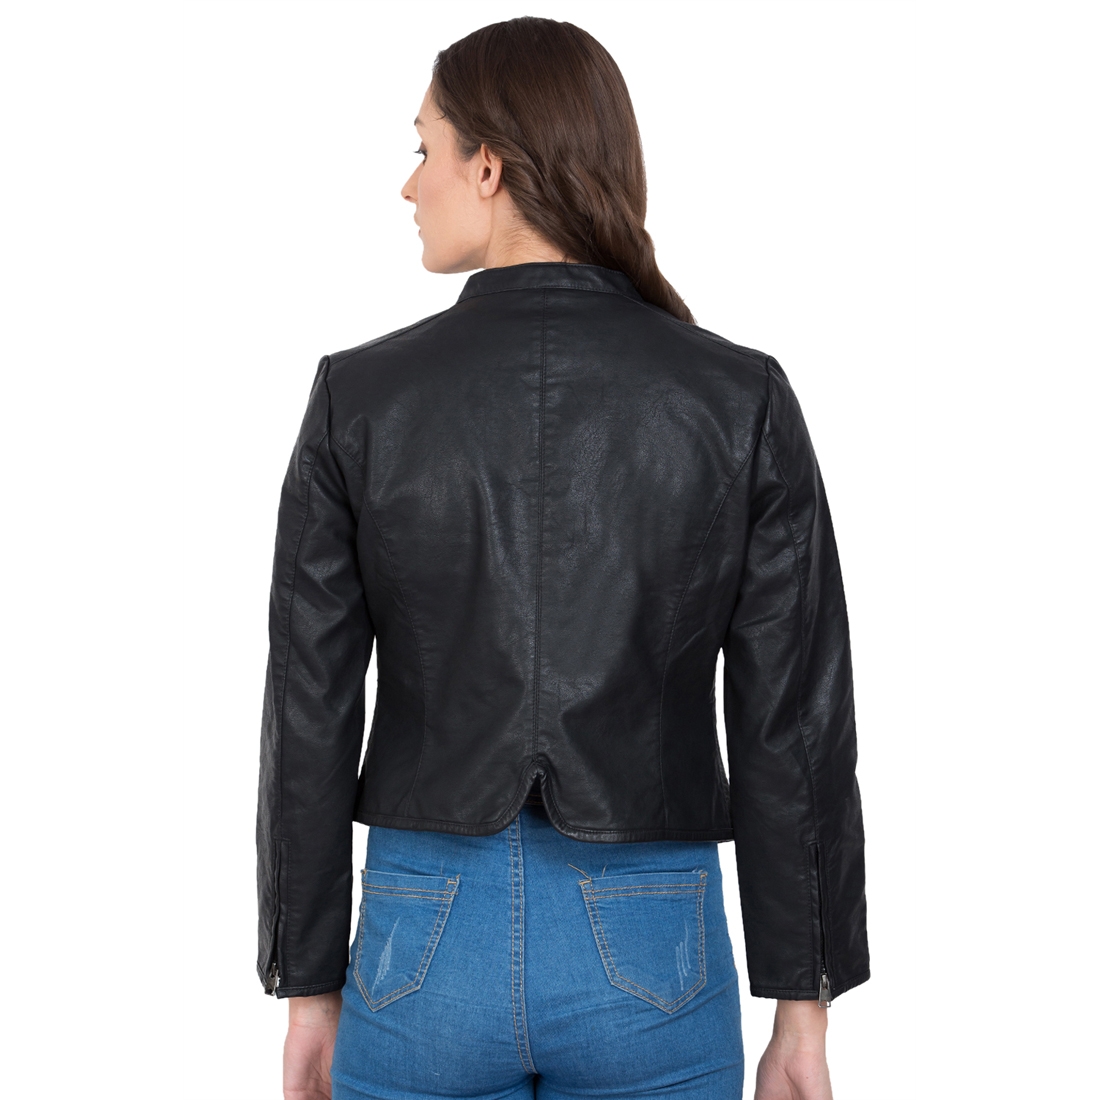 Justanned | JUSTANNED CHARCOAL WOMEN LEATHER JACKET 4